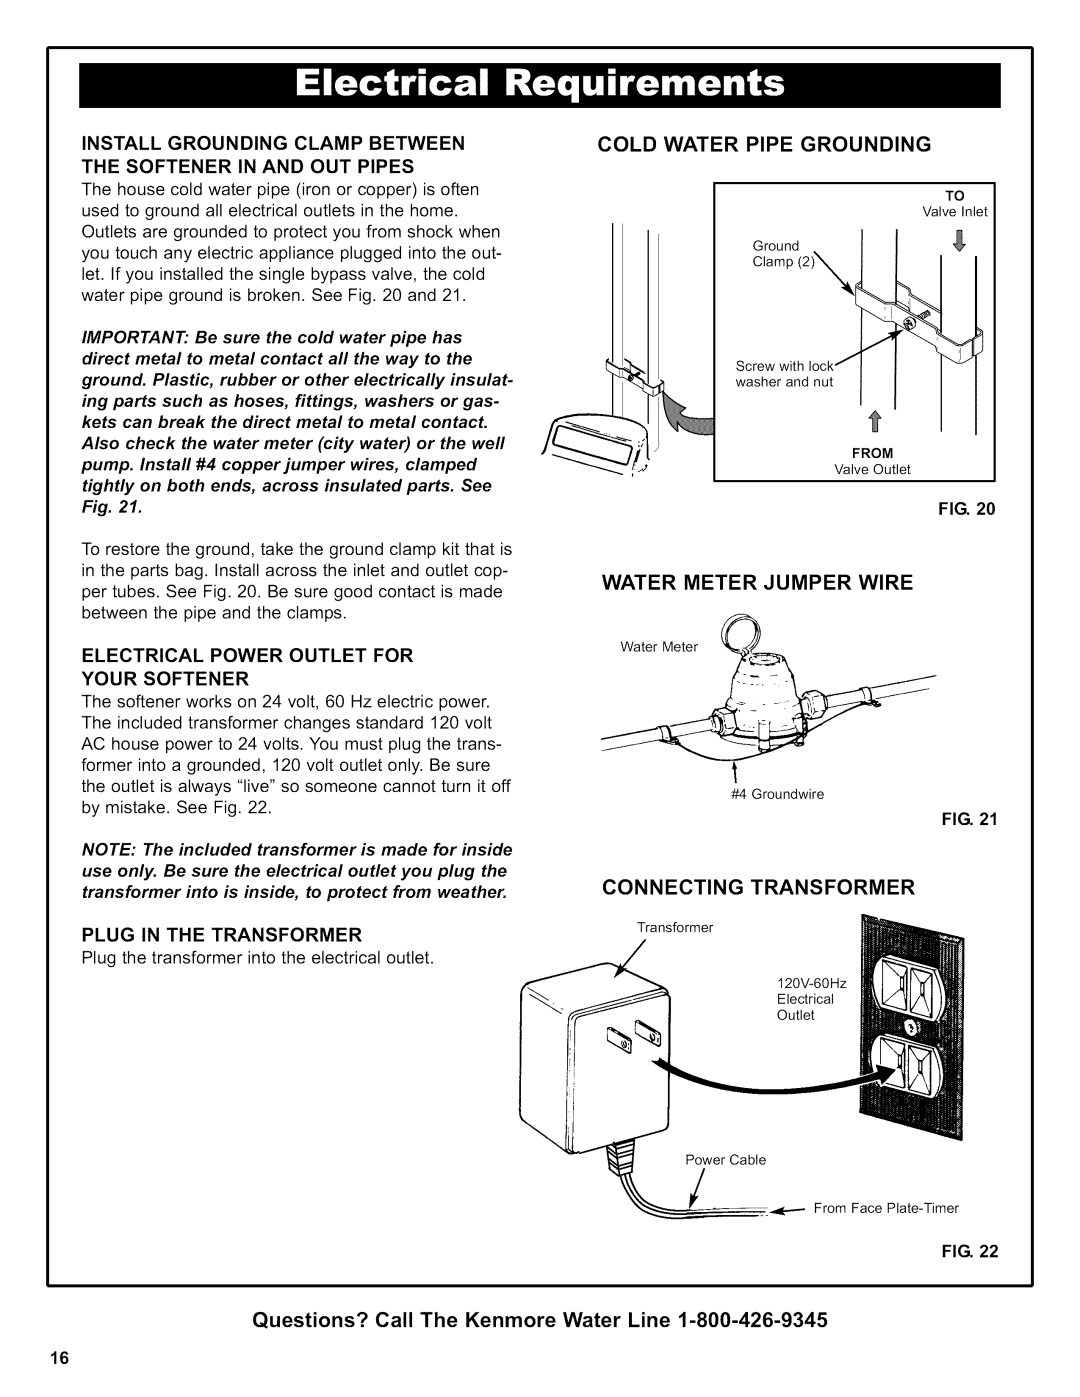 Kenmore 625.38376 Cold Water Pipe Grounding, Water Meter Jumper Wire, Connecting Transformer, Plug In The Transformer 